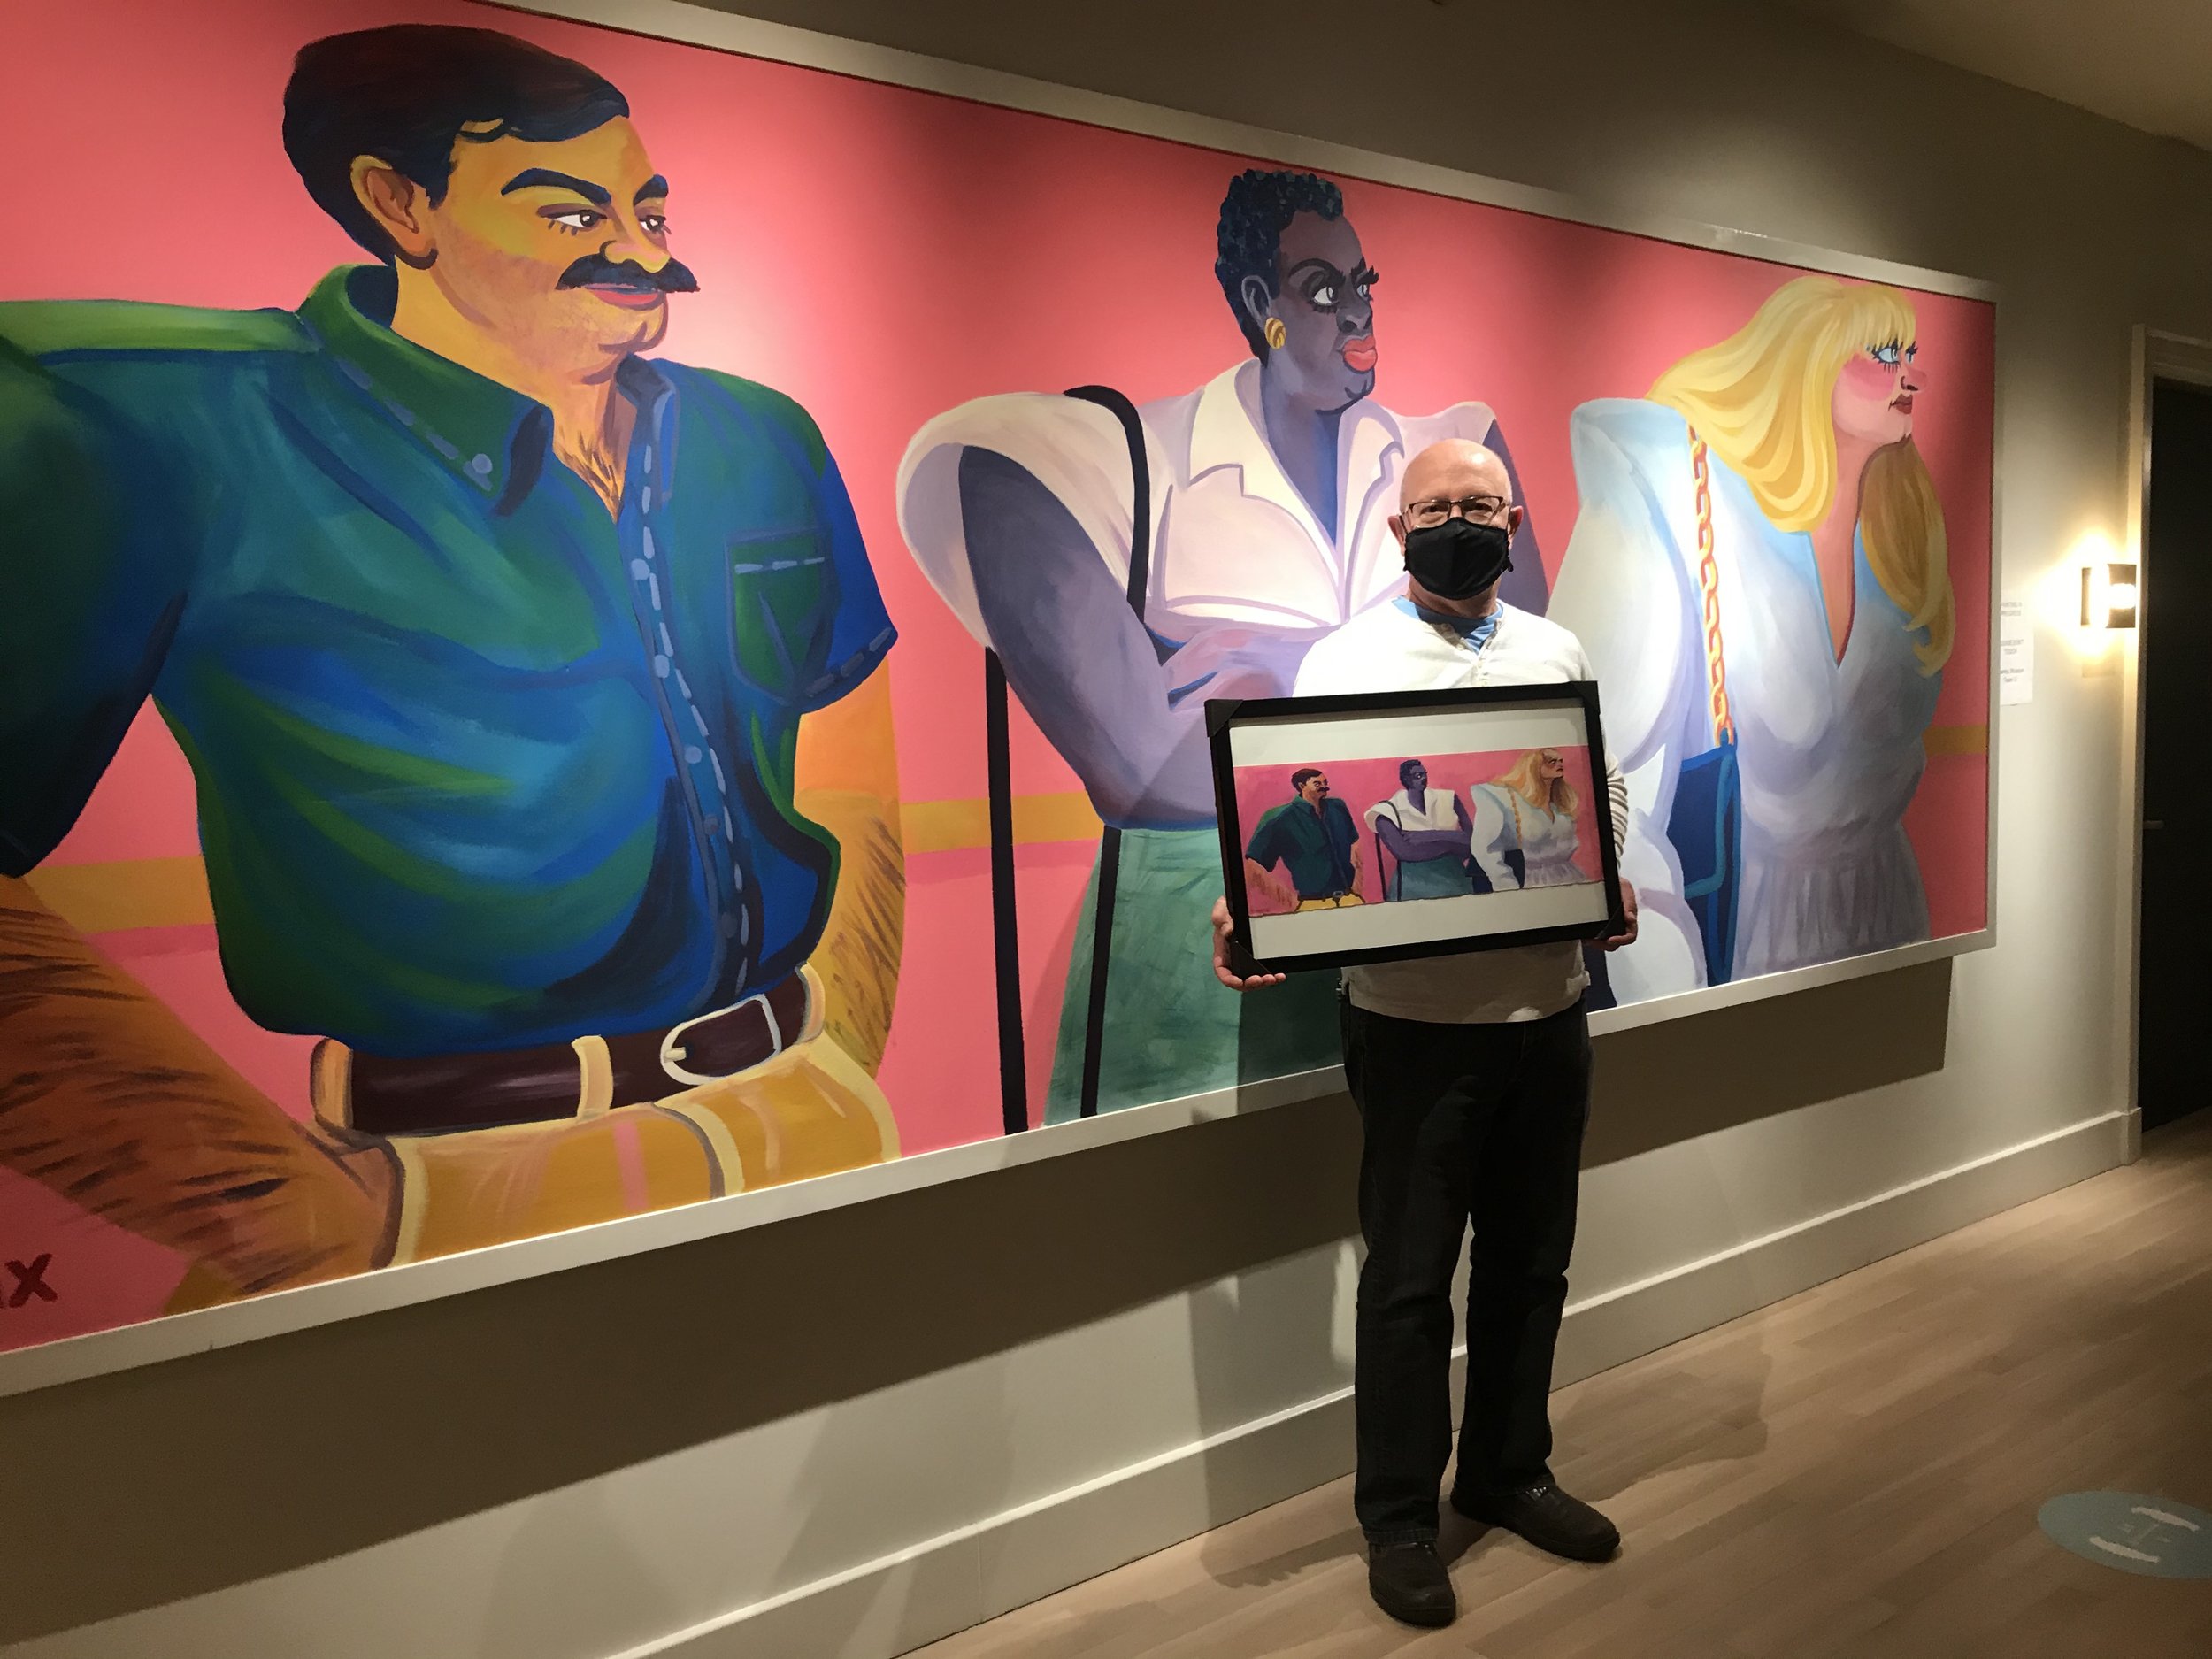  Arnold, a guest staying at the hotel, purchased the original piece after witnessing the painting of the mural 